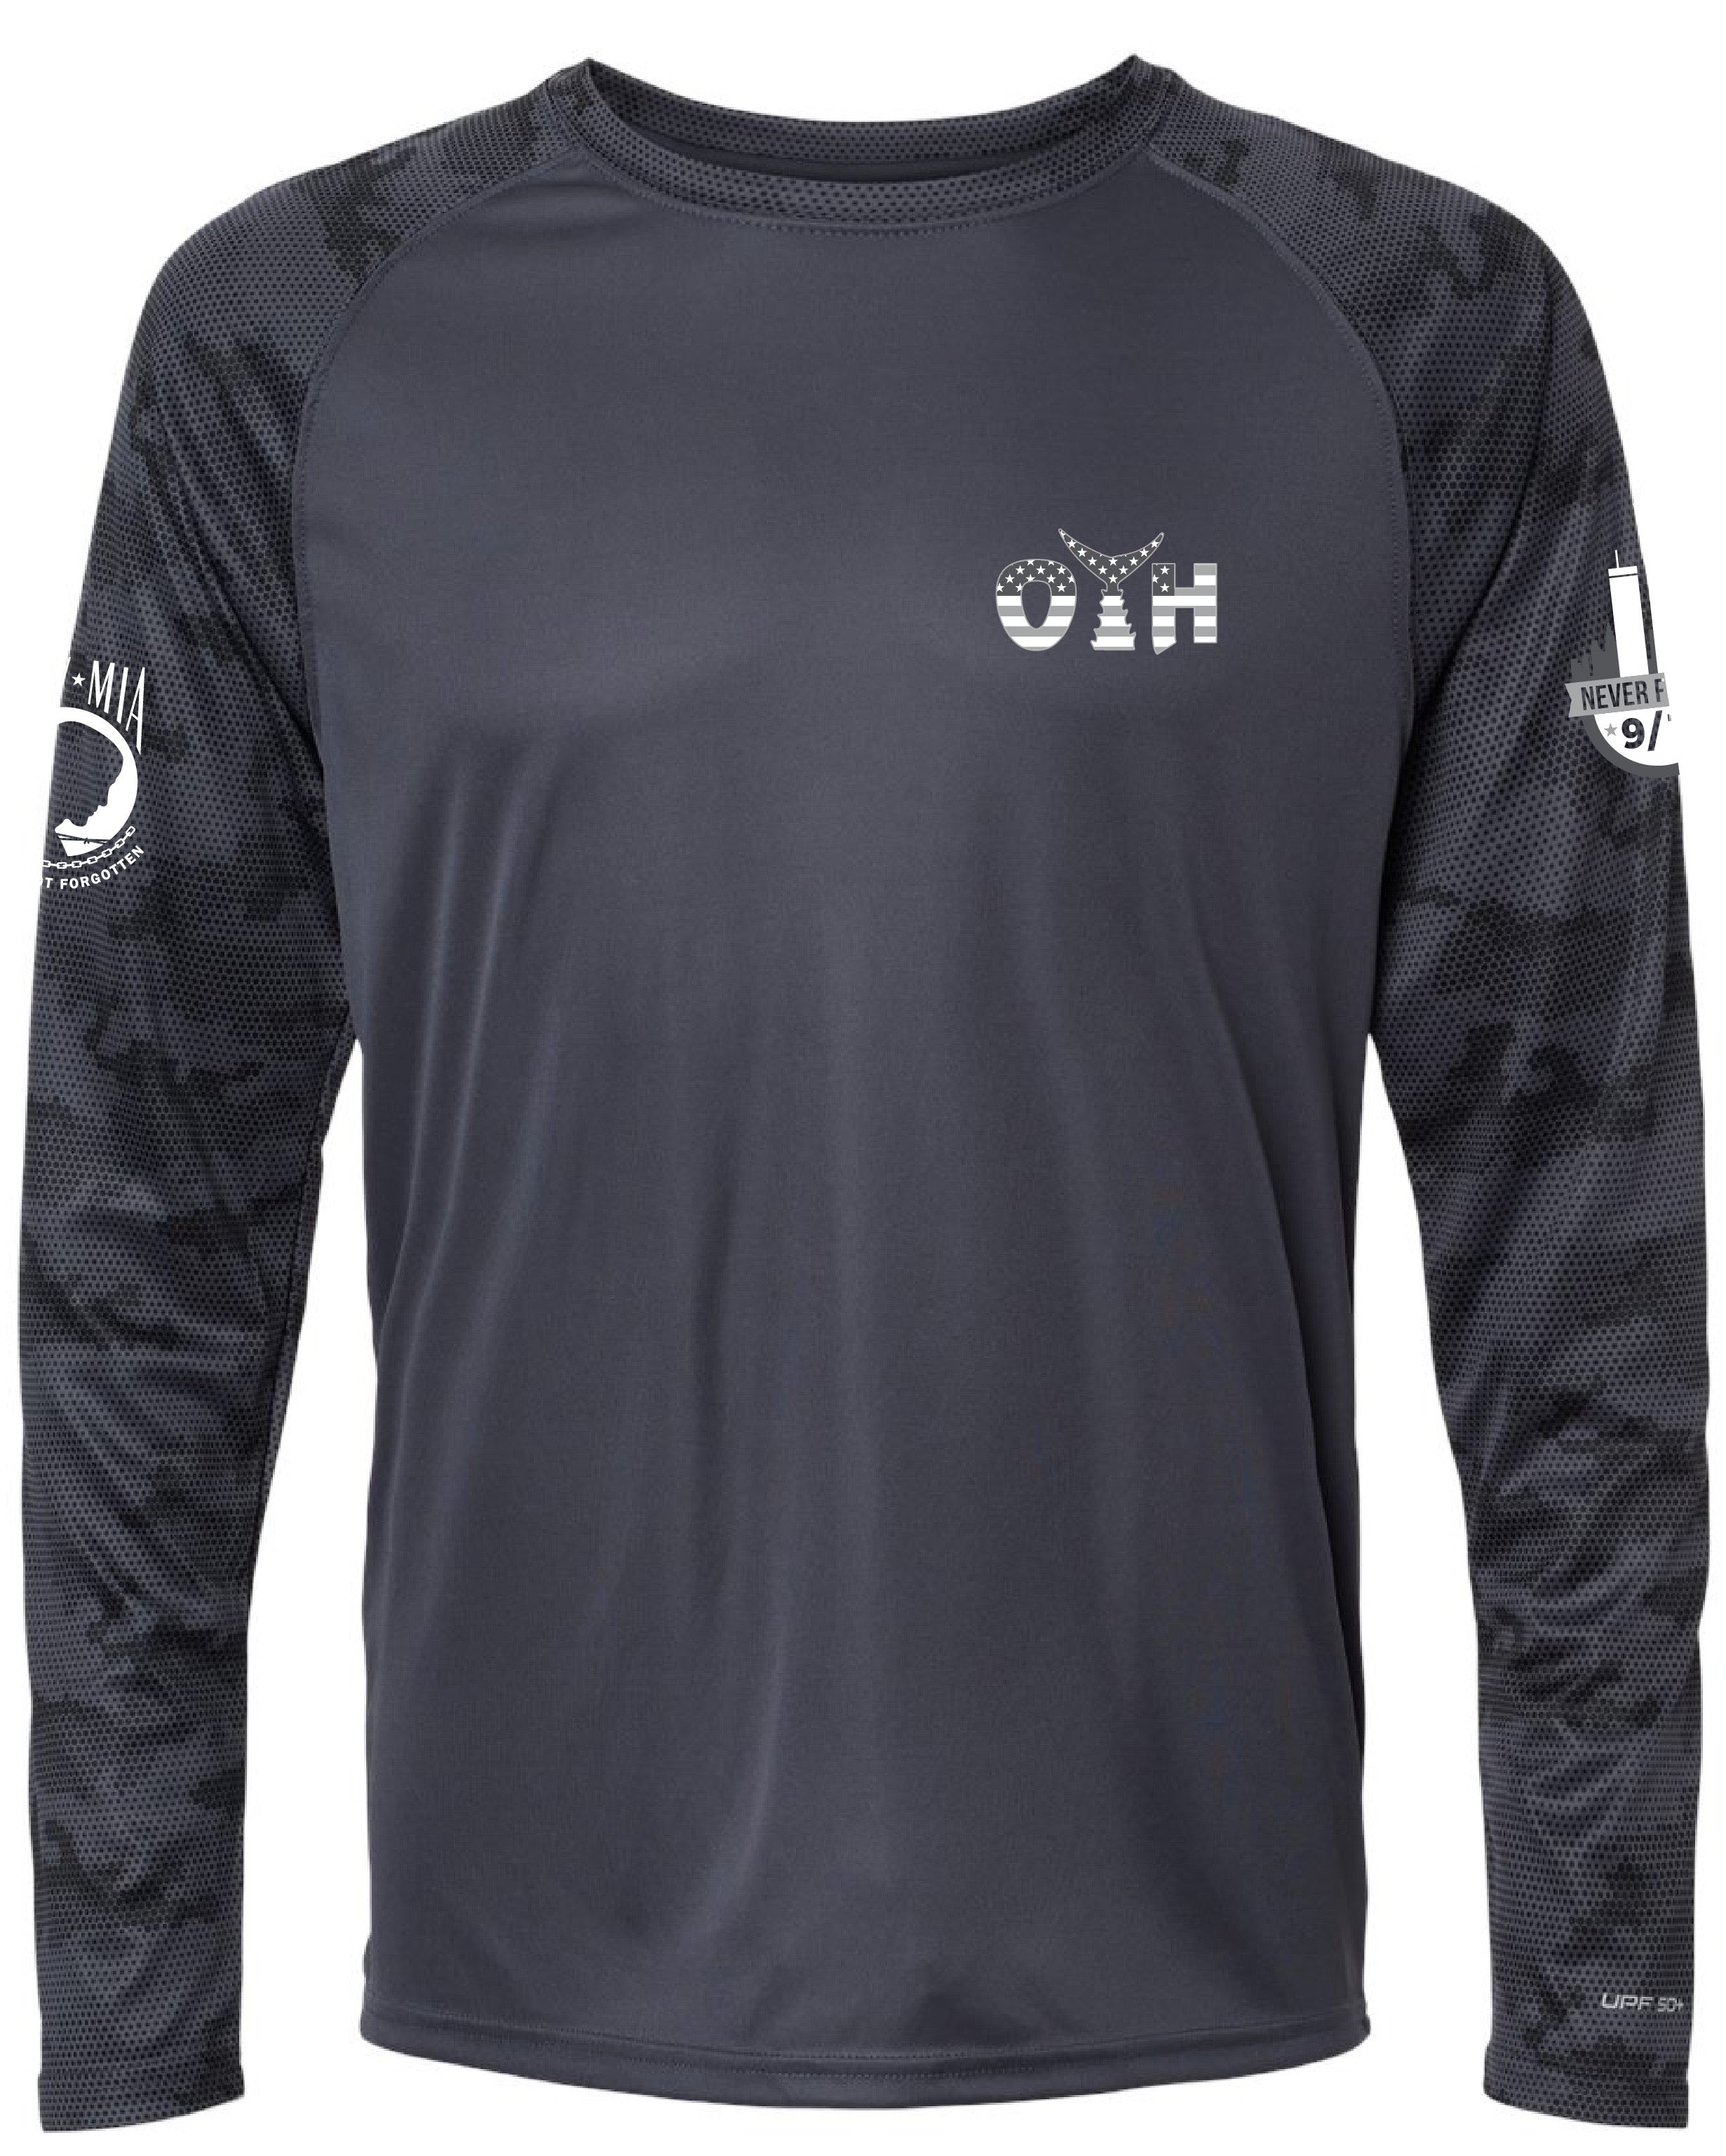 OTH Remembrance 9/11 and POW/MIA Long sleeve UVX apparel